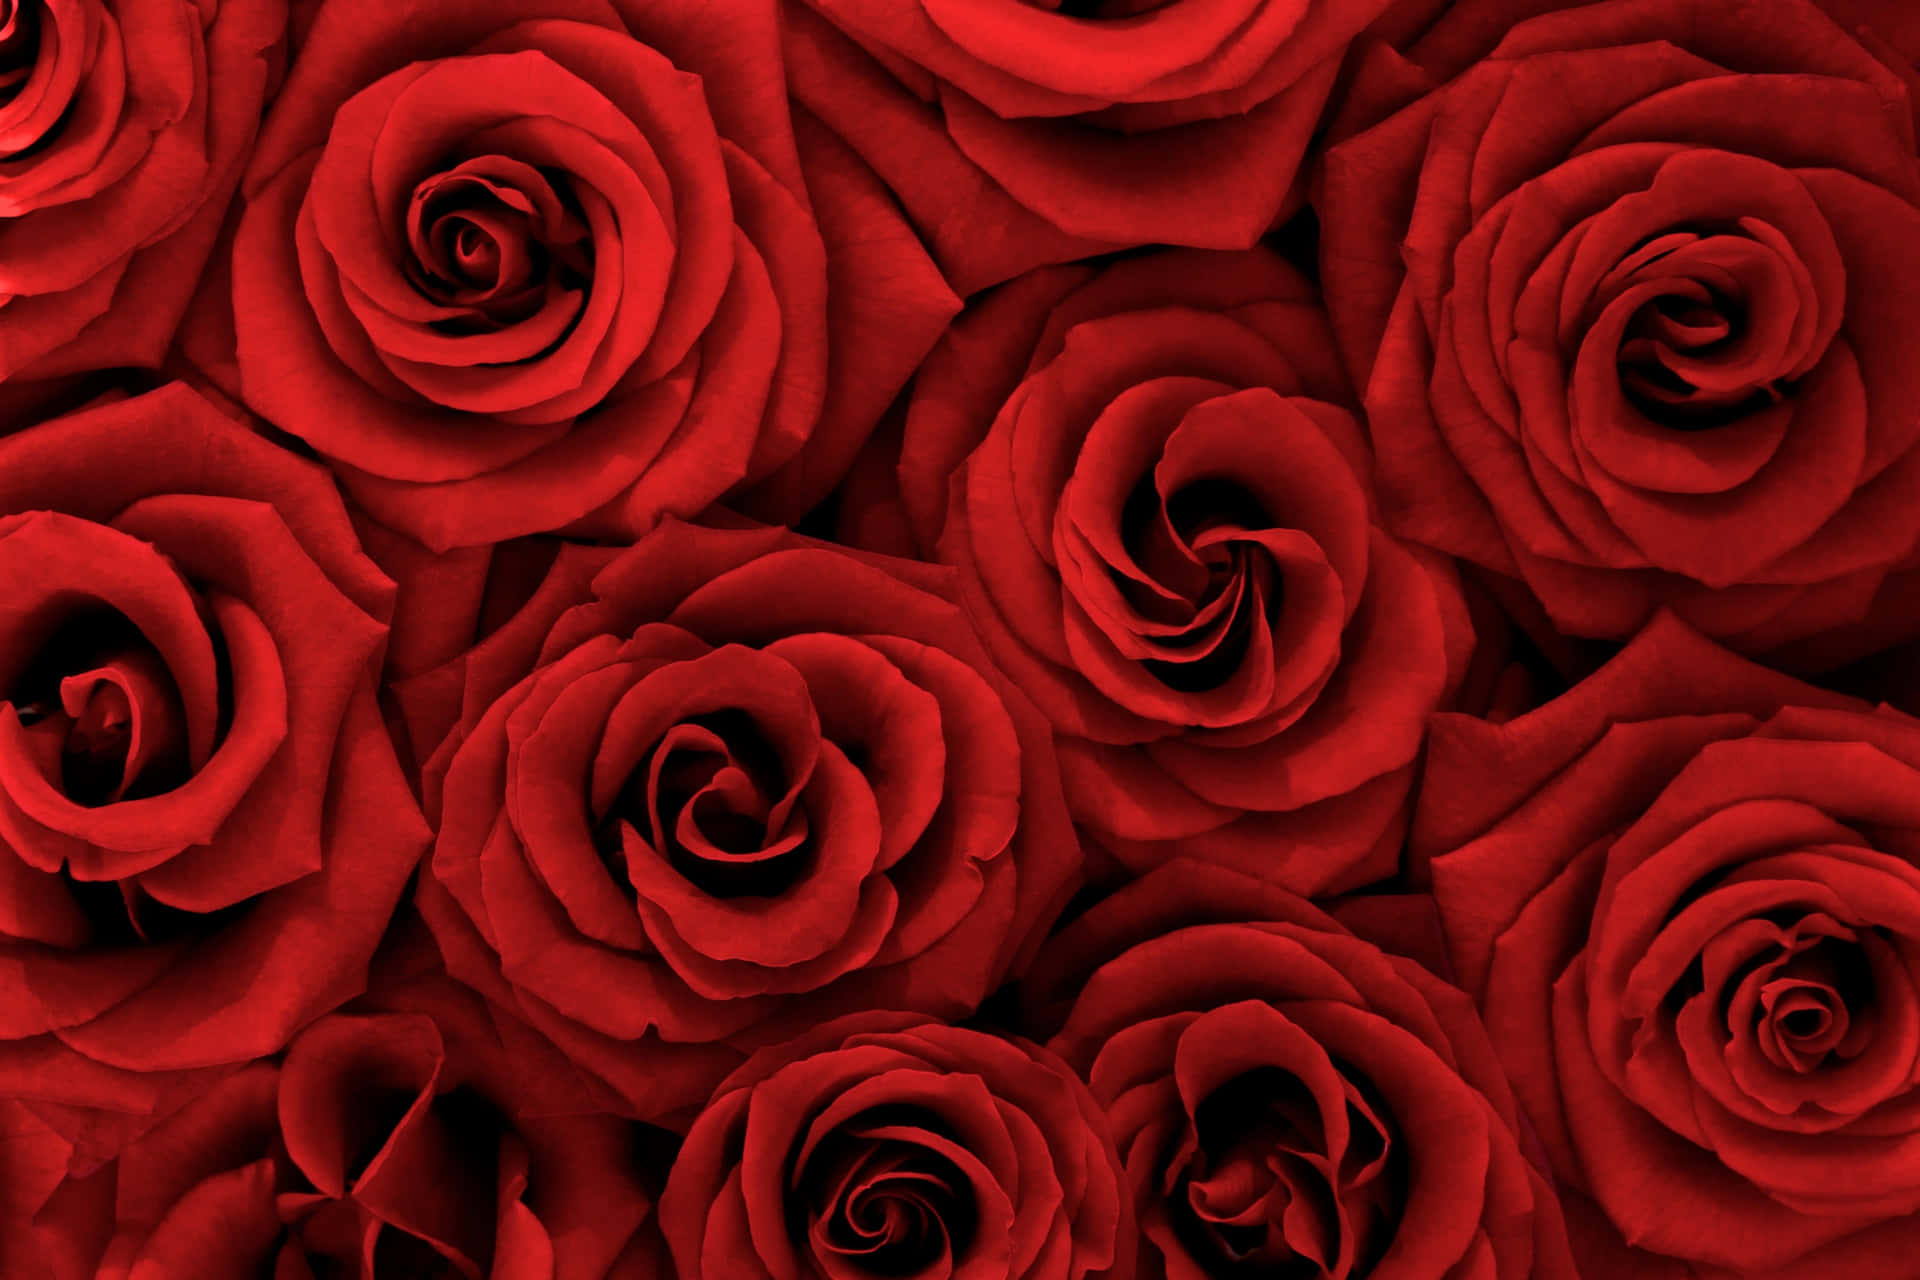 Nature's beauty at its best - Red Roses